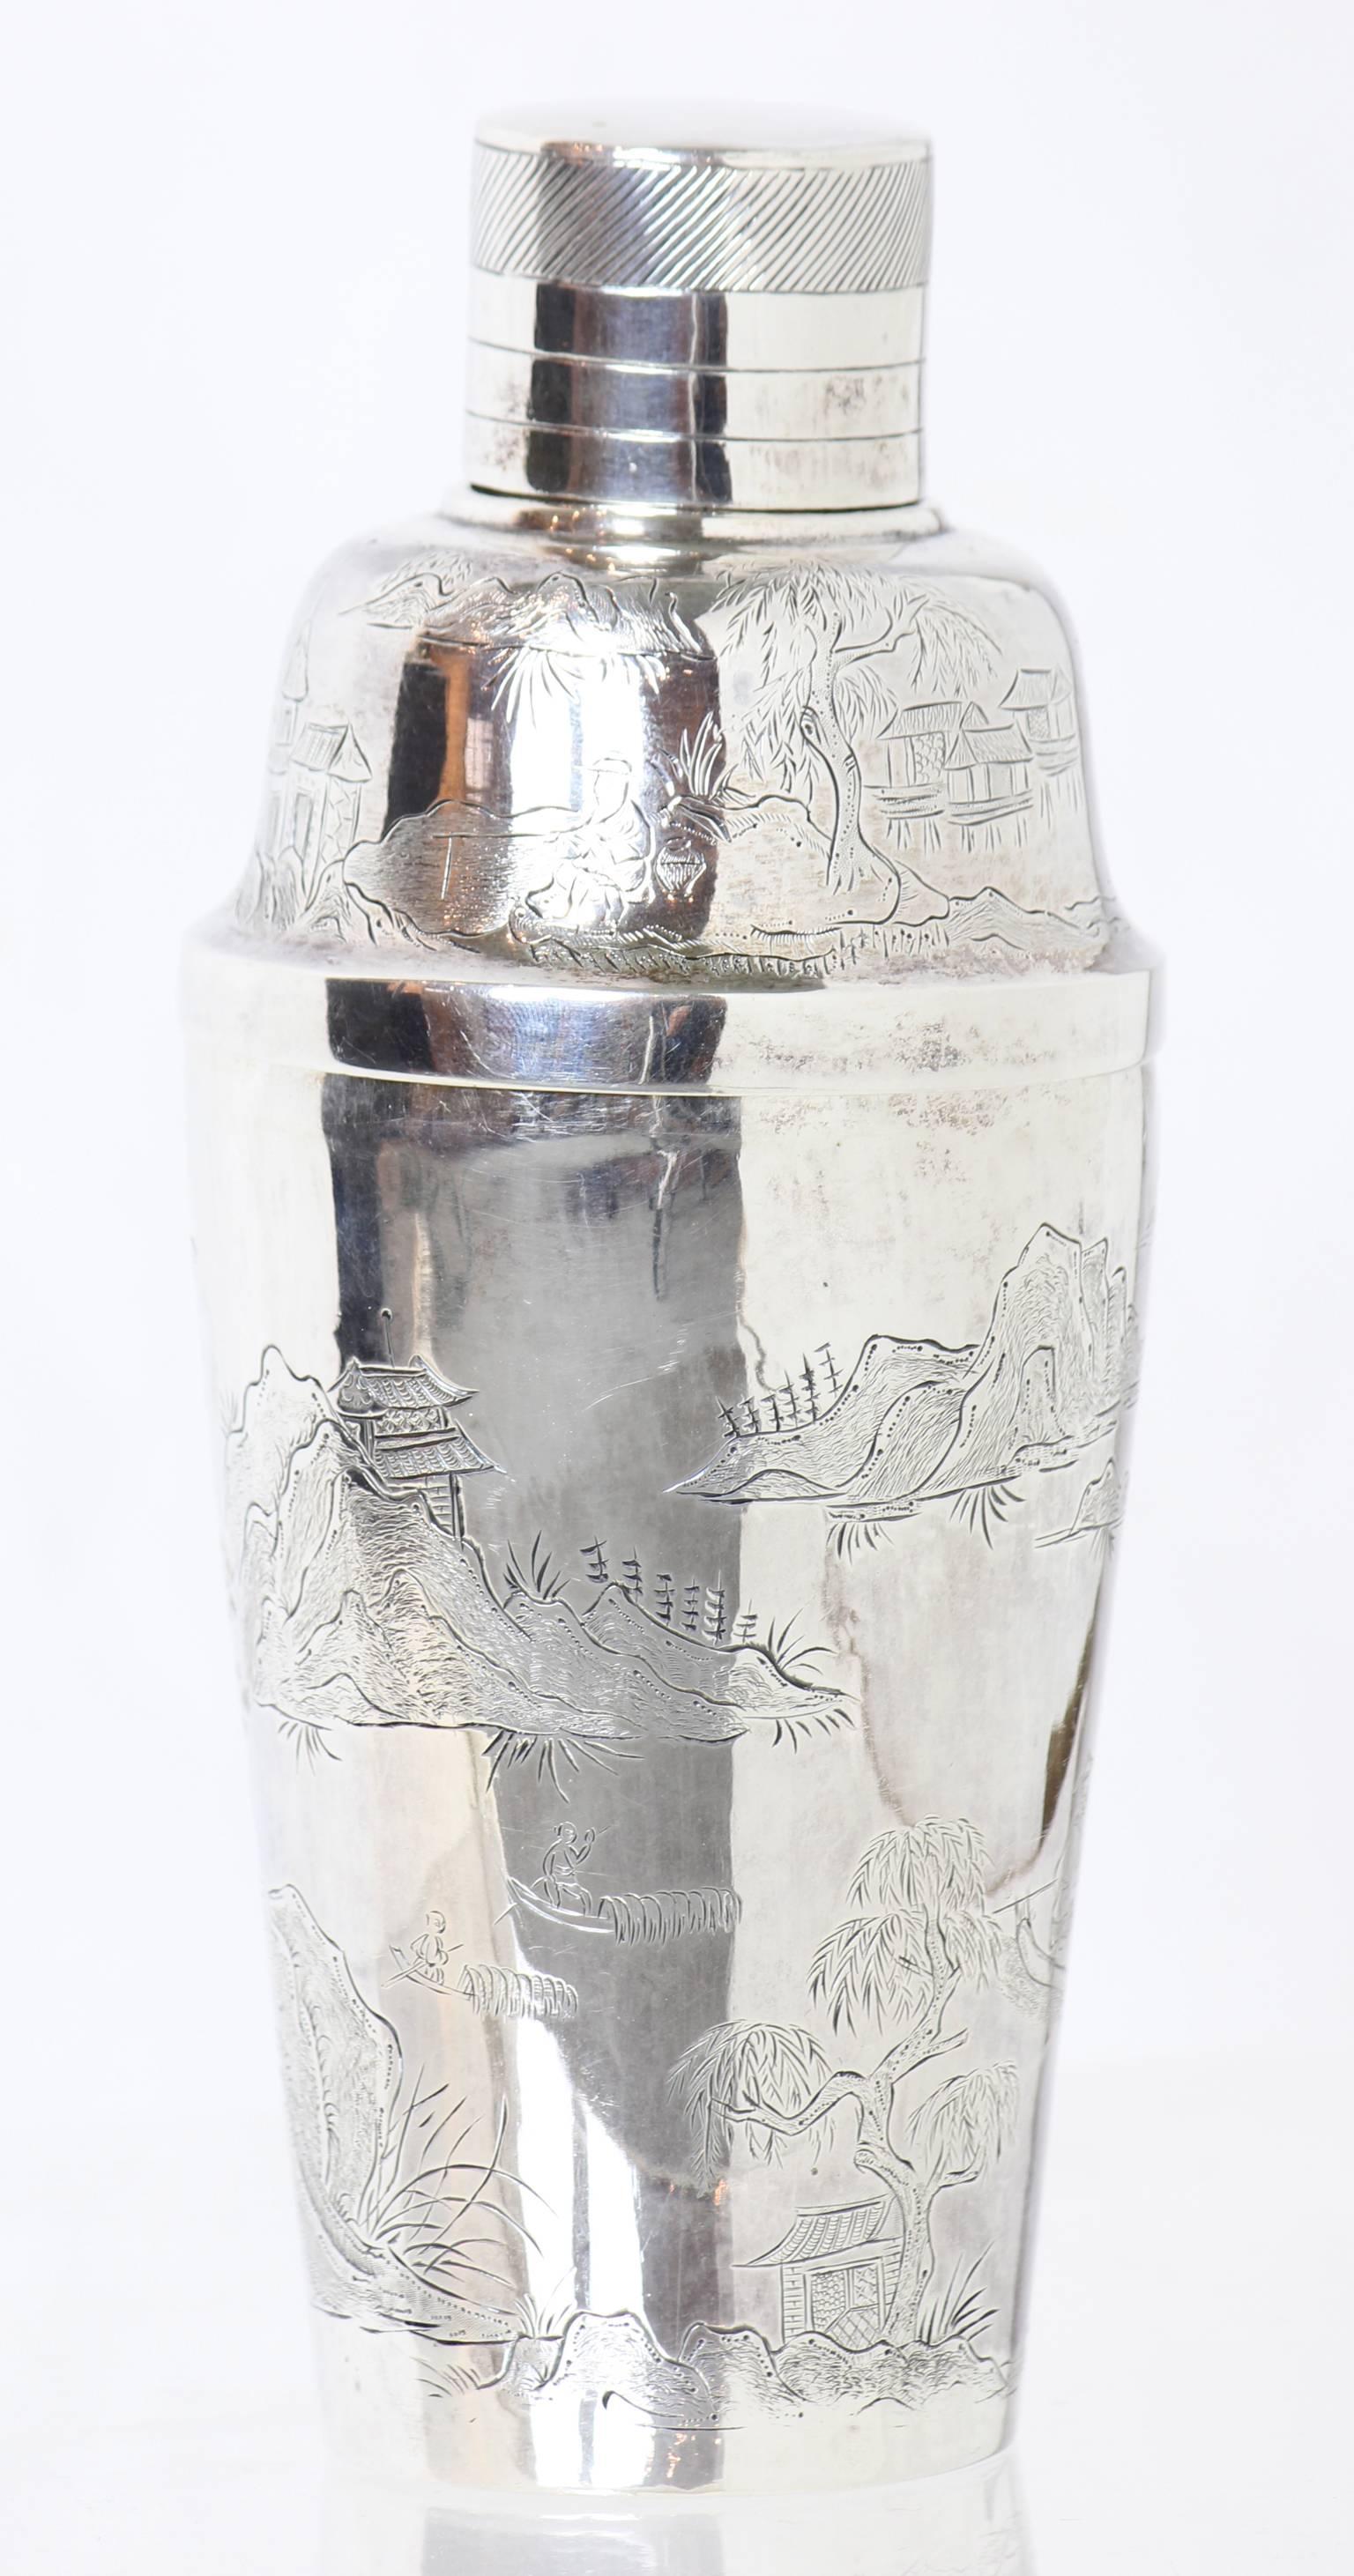 An early 20th century Chinese Export solid silver cocktail shaker heavily engraved with mountains and trees in a village setting. Monogramed with a 